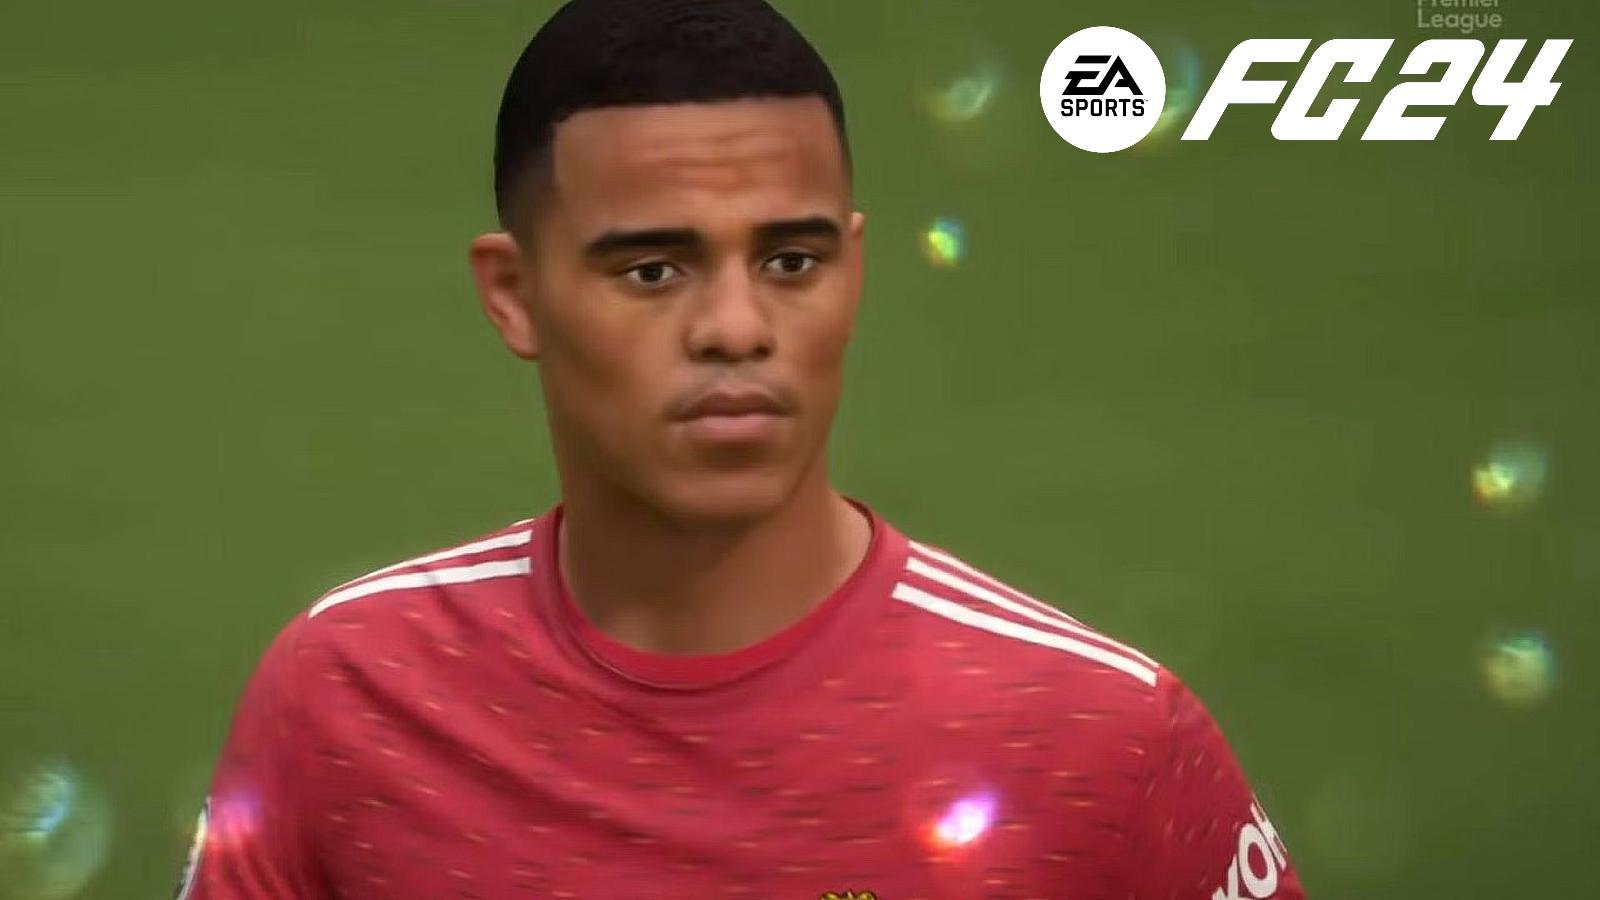 Mason Greenwood in FIFA 23 with EA FC 24 logo in top right corner